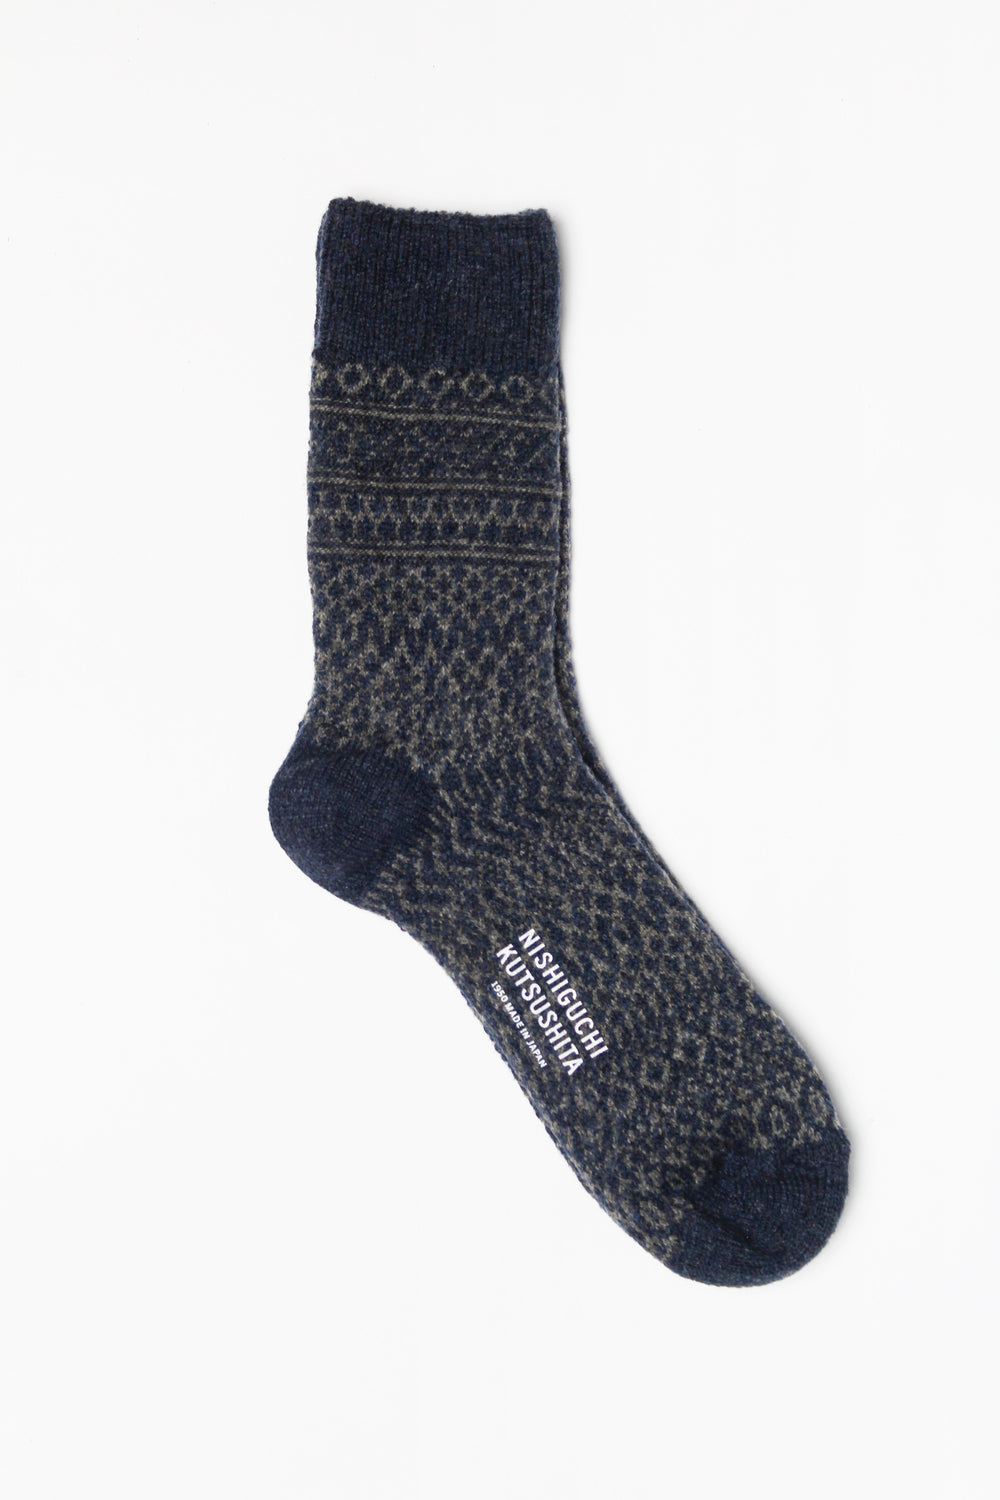 Wool Jacquard Socks, Navy with Grey (Size M + L Only)